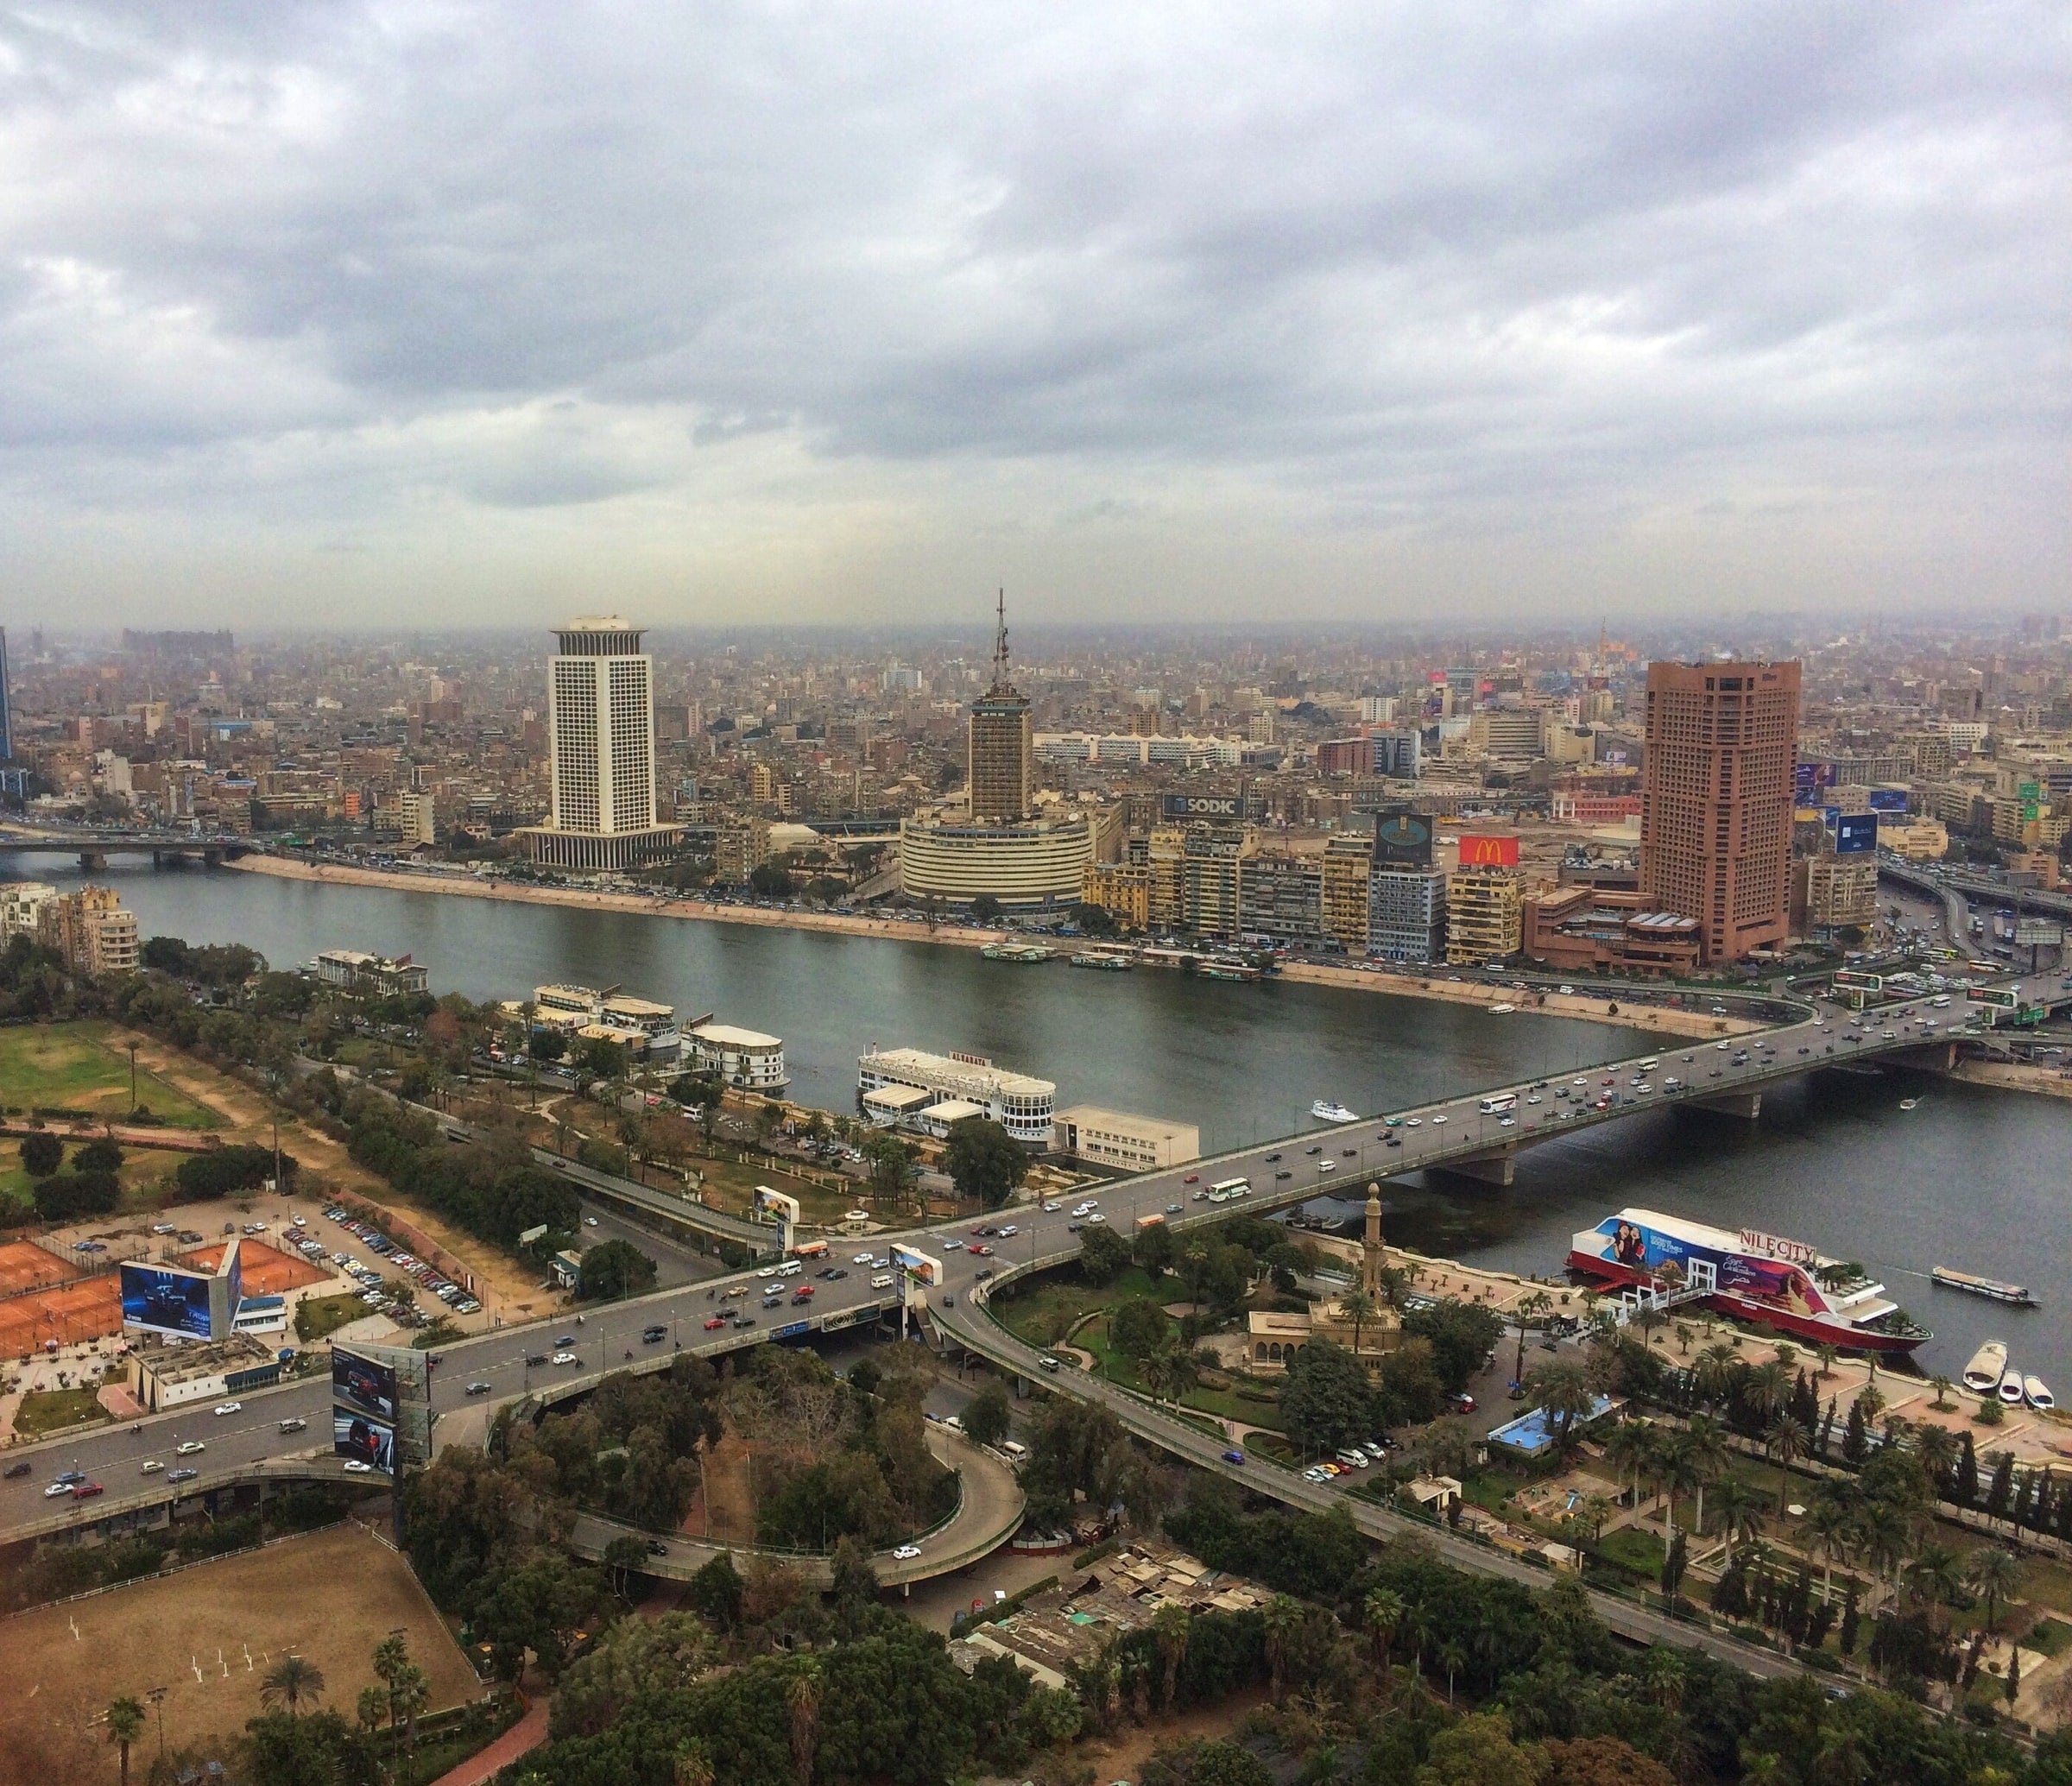 Egyptian equilibrium: how can the country balance renewables and fossil fuels?